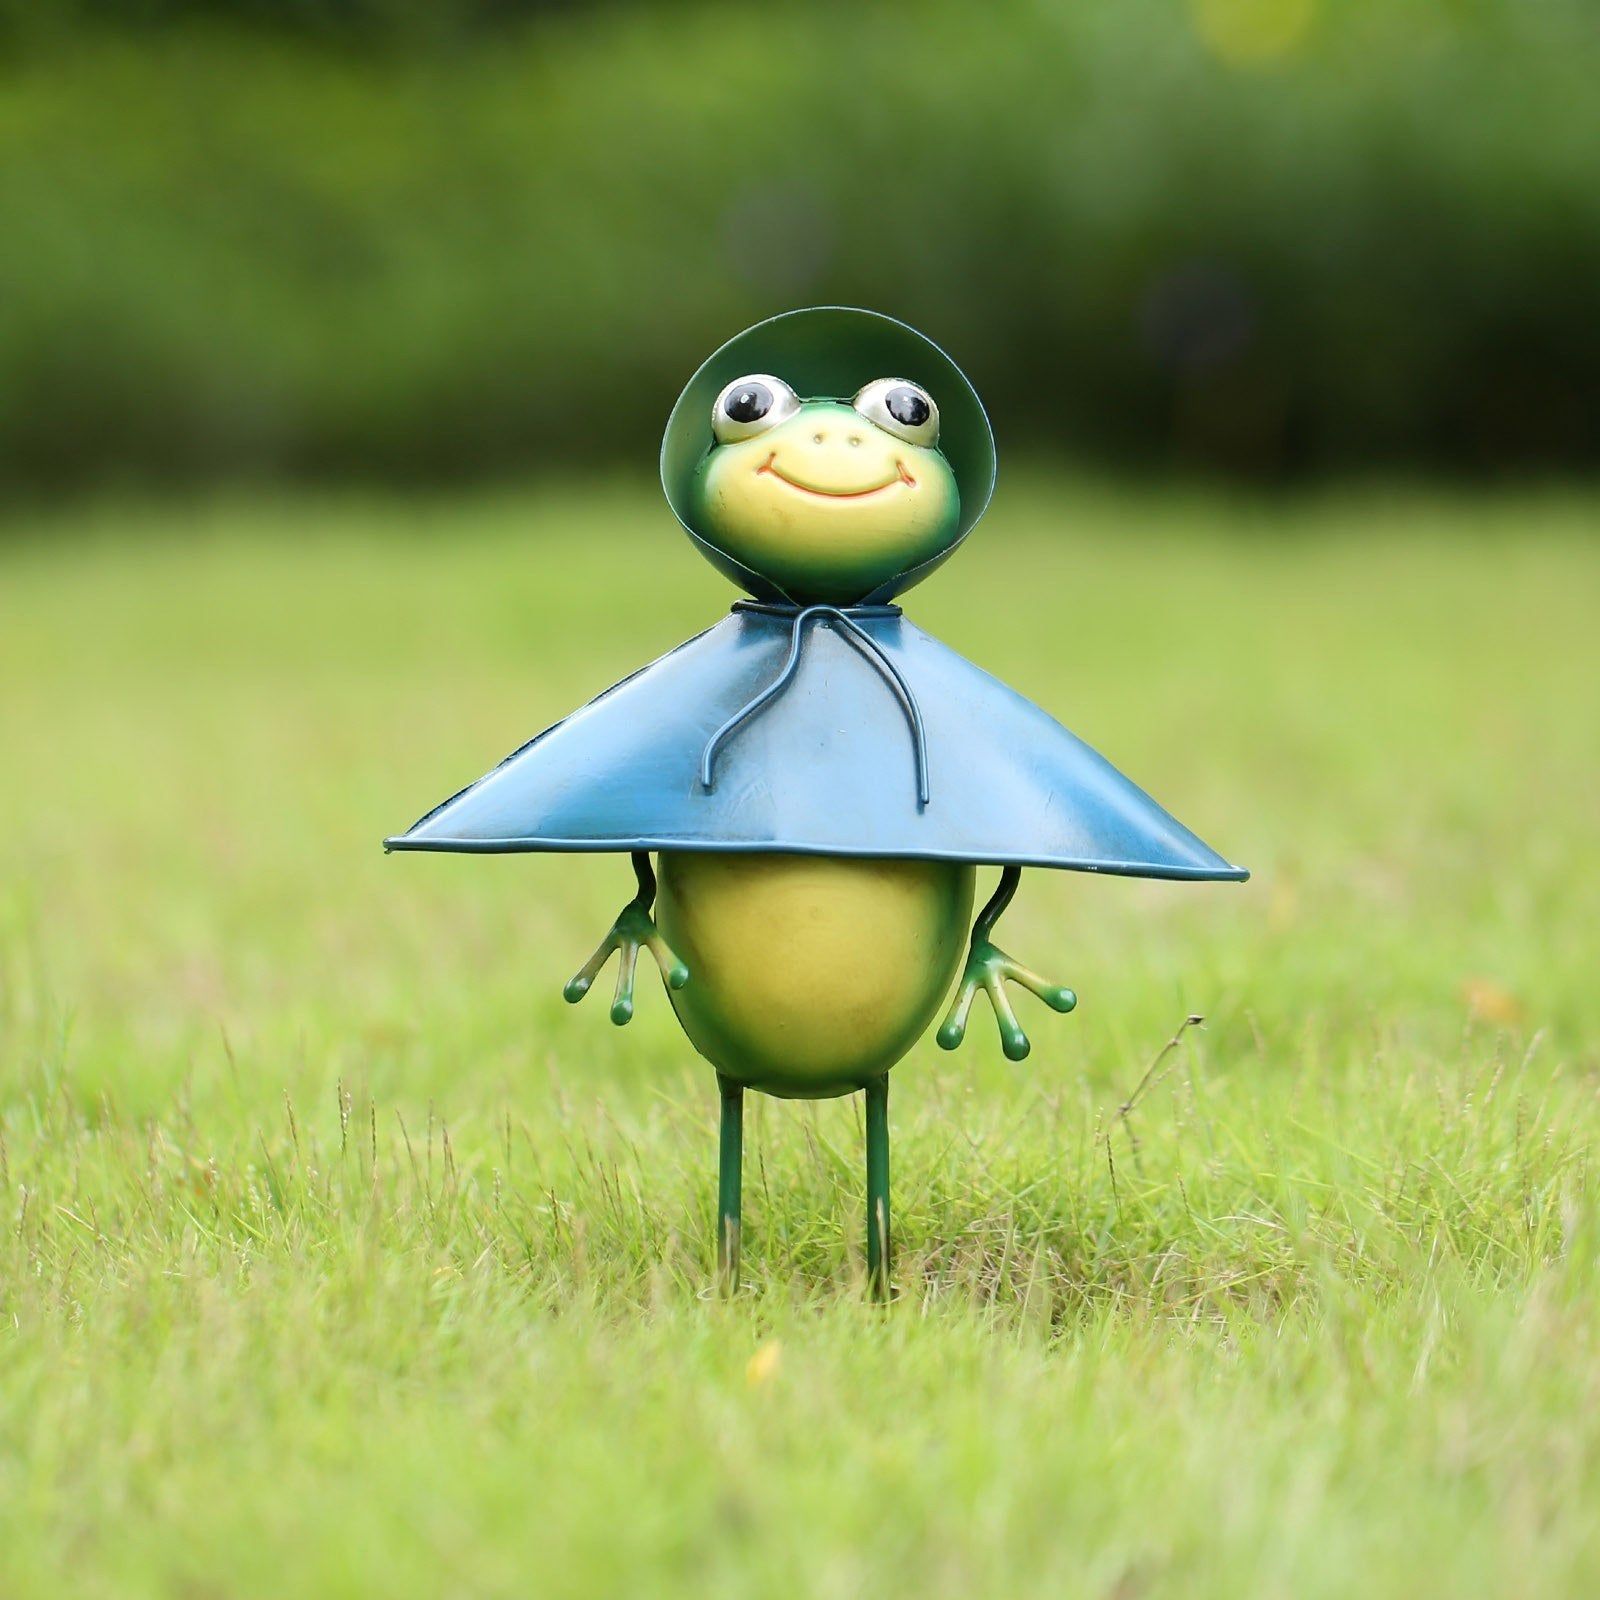 In the land of fairytales, a cute frog ornament hops into your life!